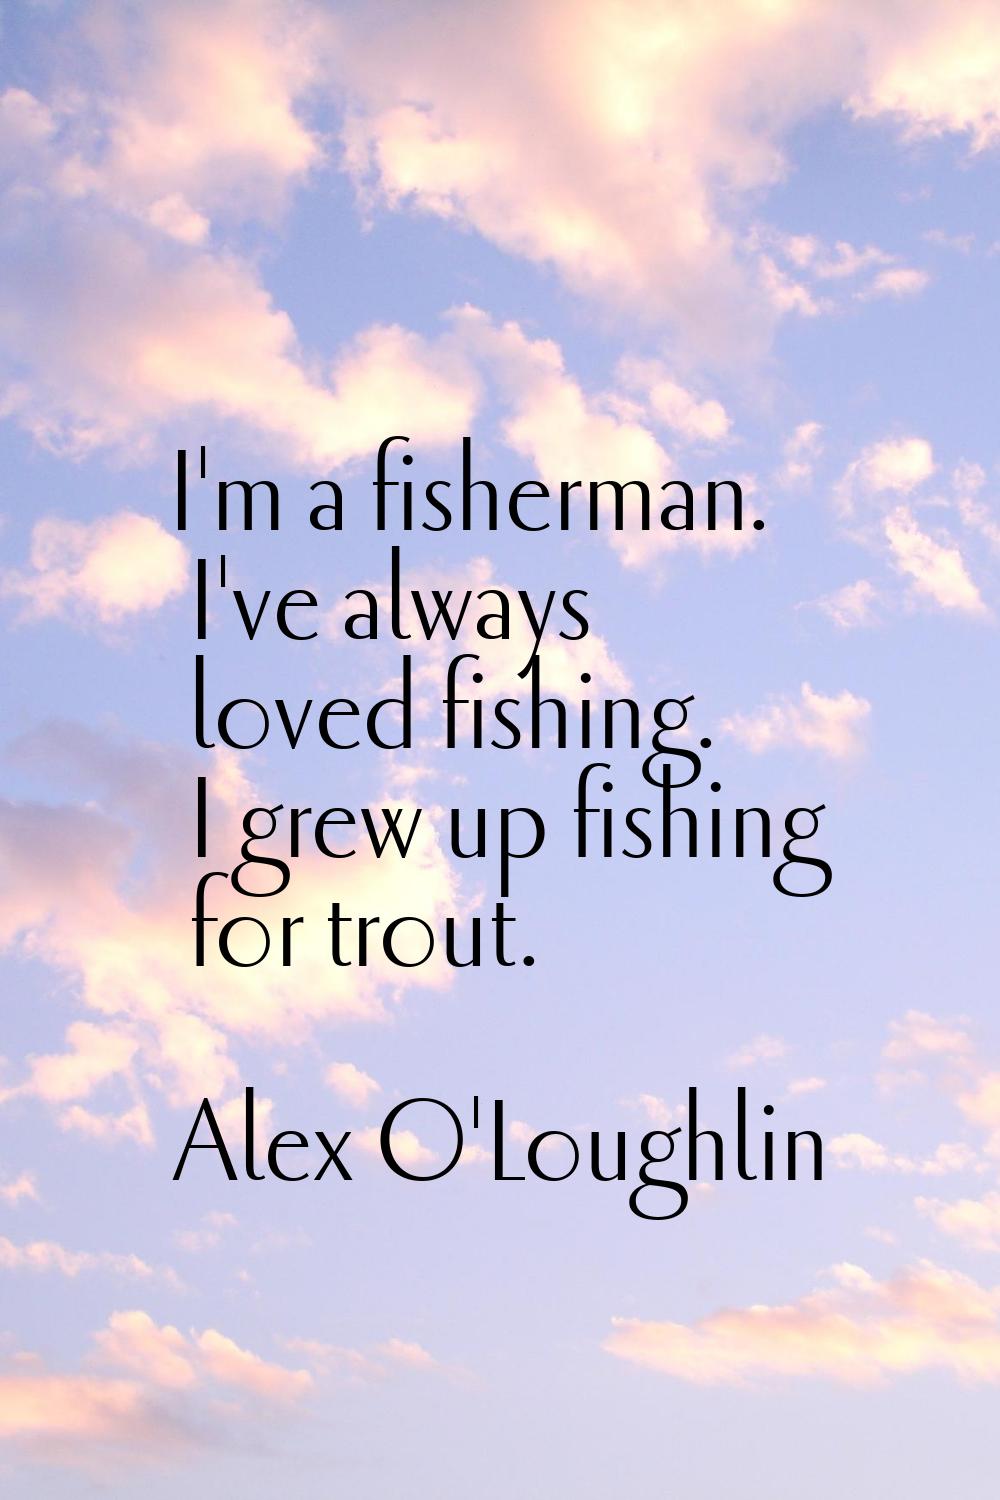 I'm a fisherman. I've always loved fishing. I grew up fishing for trout.